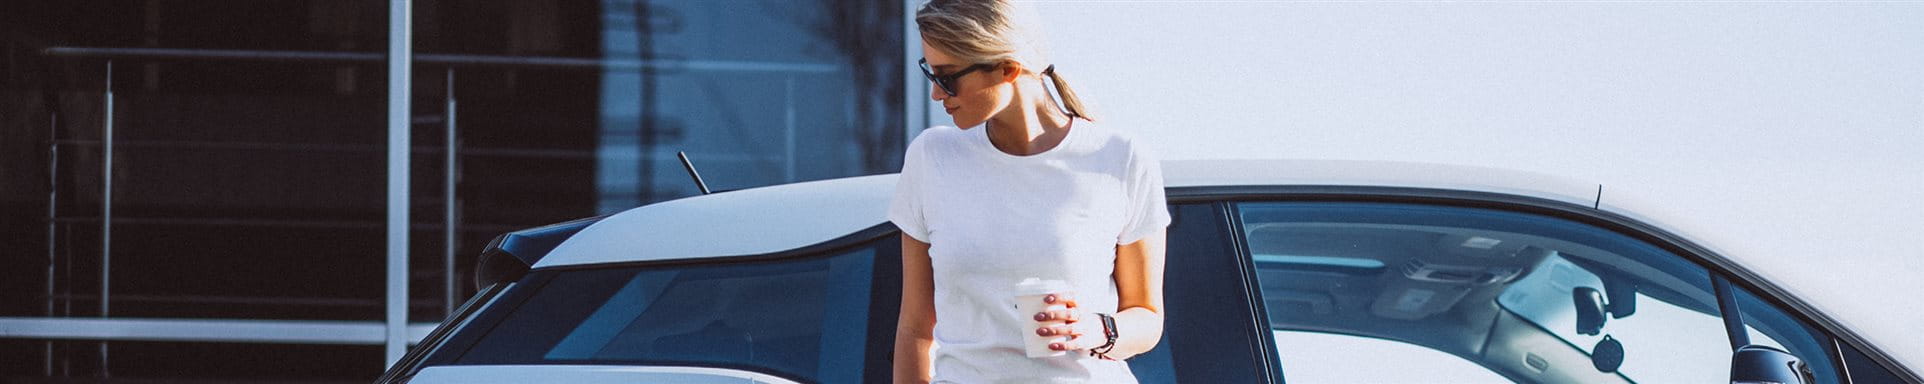  Woman stands in front of her car at the electric charging station and drinks coffee